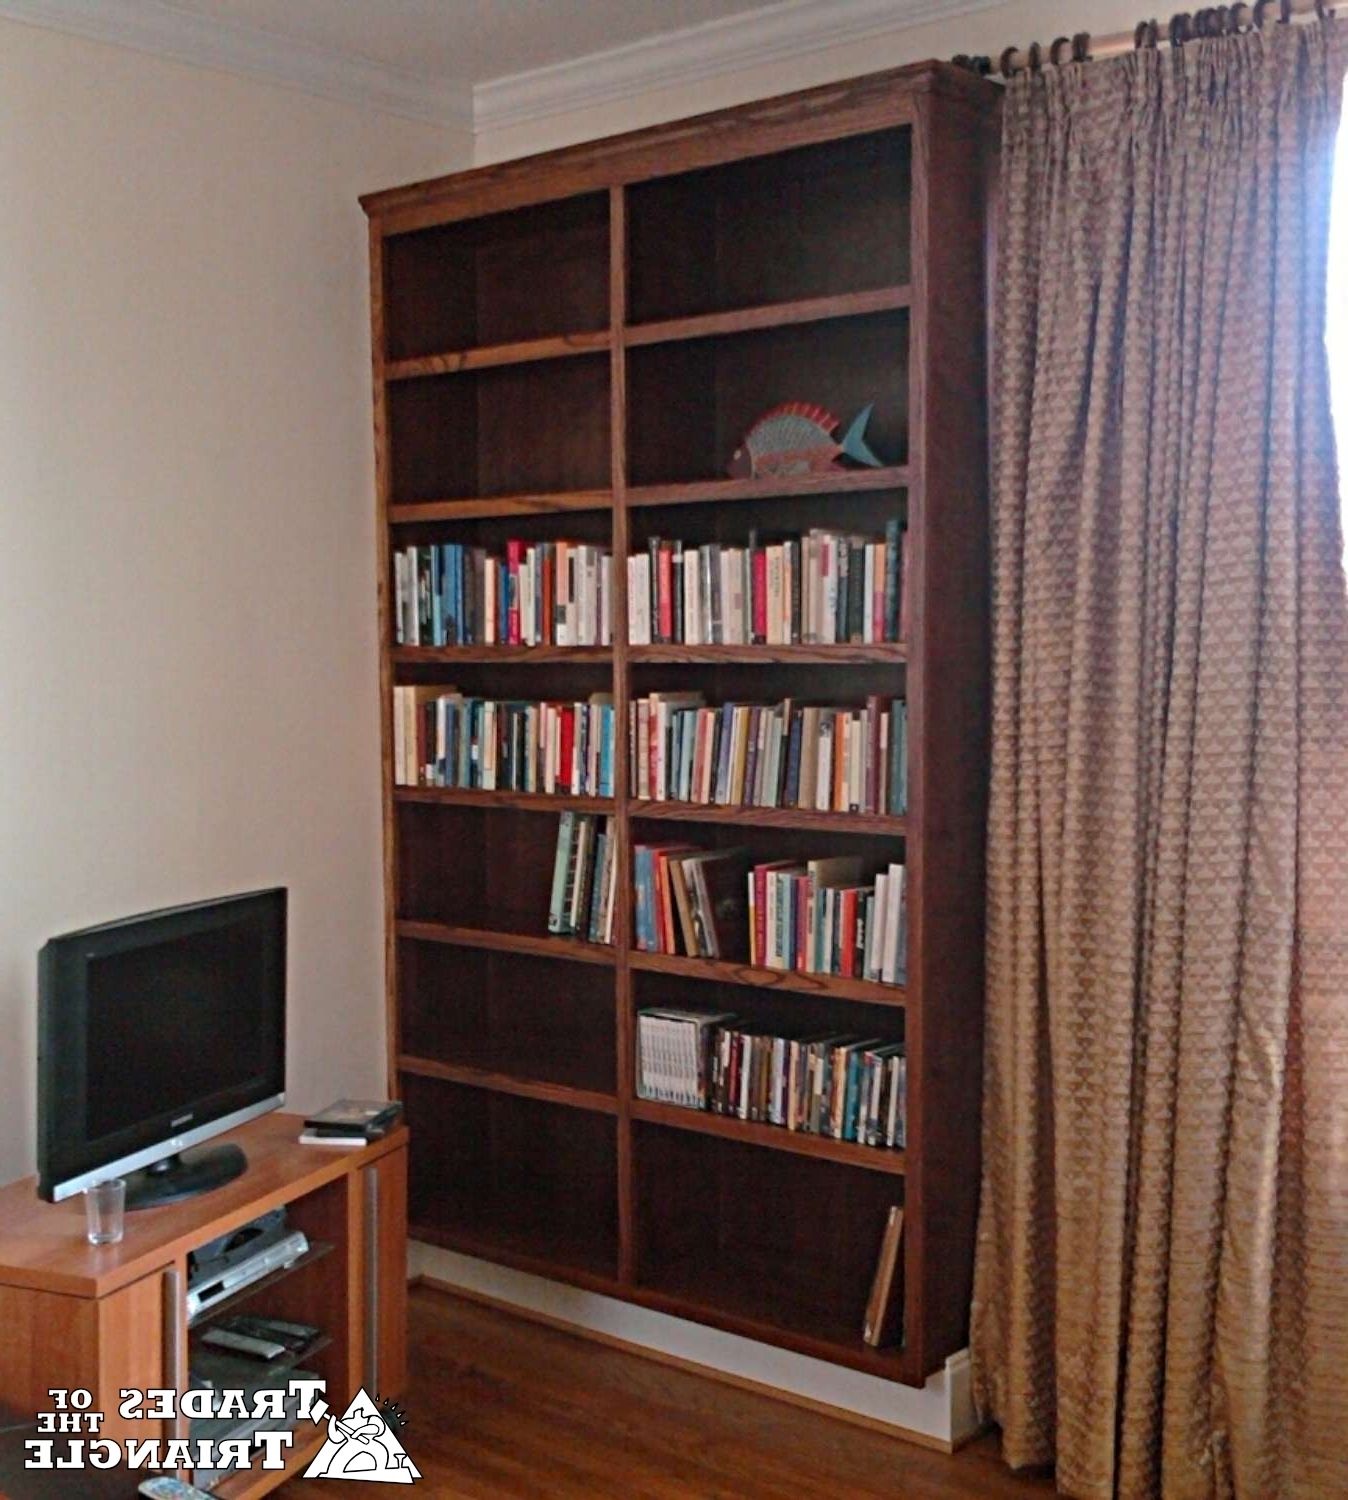 Durham Bookcases Pertaining To 2018 Gallery Of Custom Shelving, Bookcases And Interior Trim Carpentry (View 5 of 15)